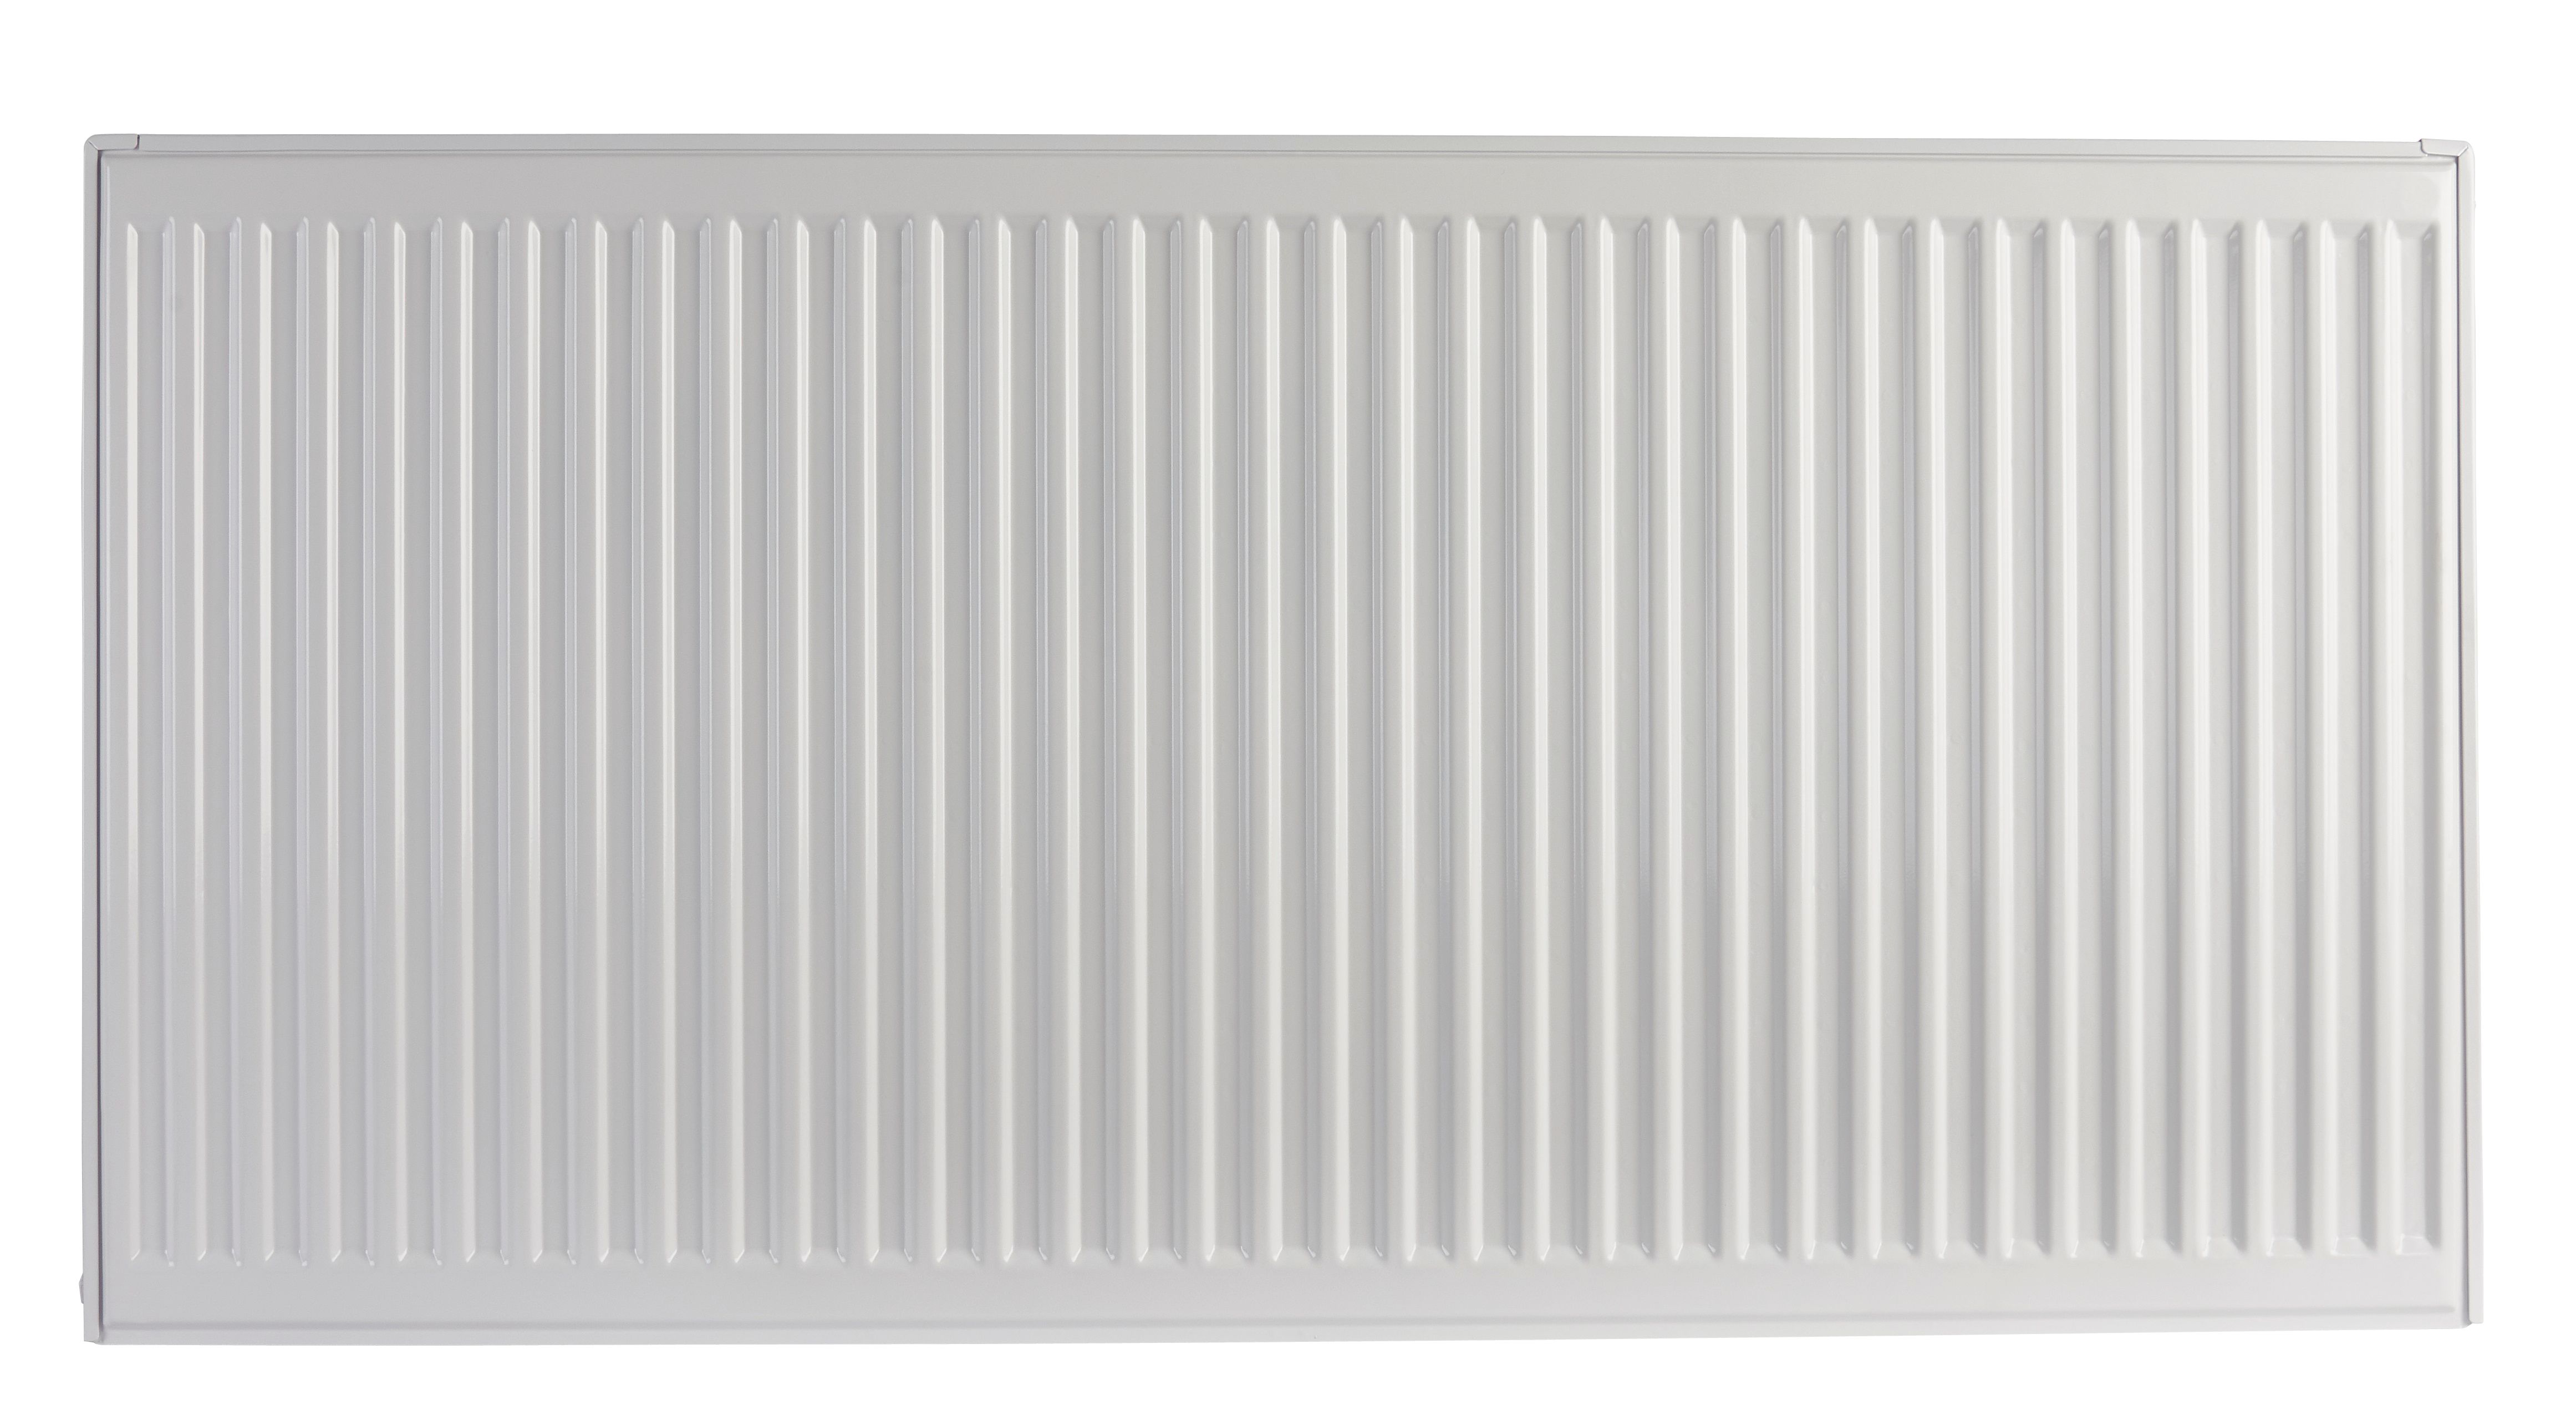 Image of Homeline by Stelrad 700 x 1600mm Type 22 Double Panel Premium Double Convector Radiator